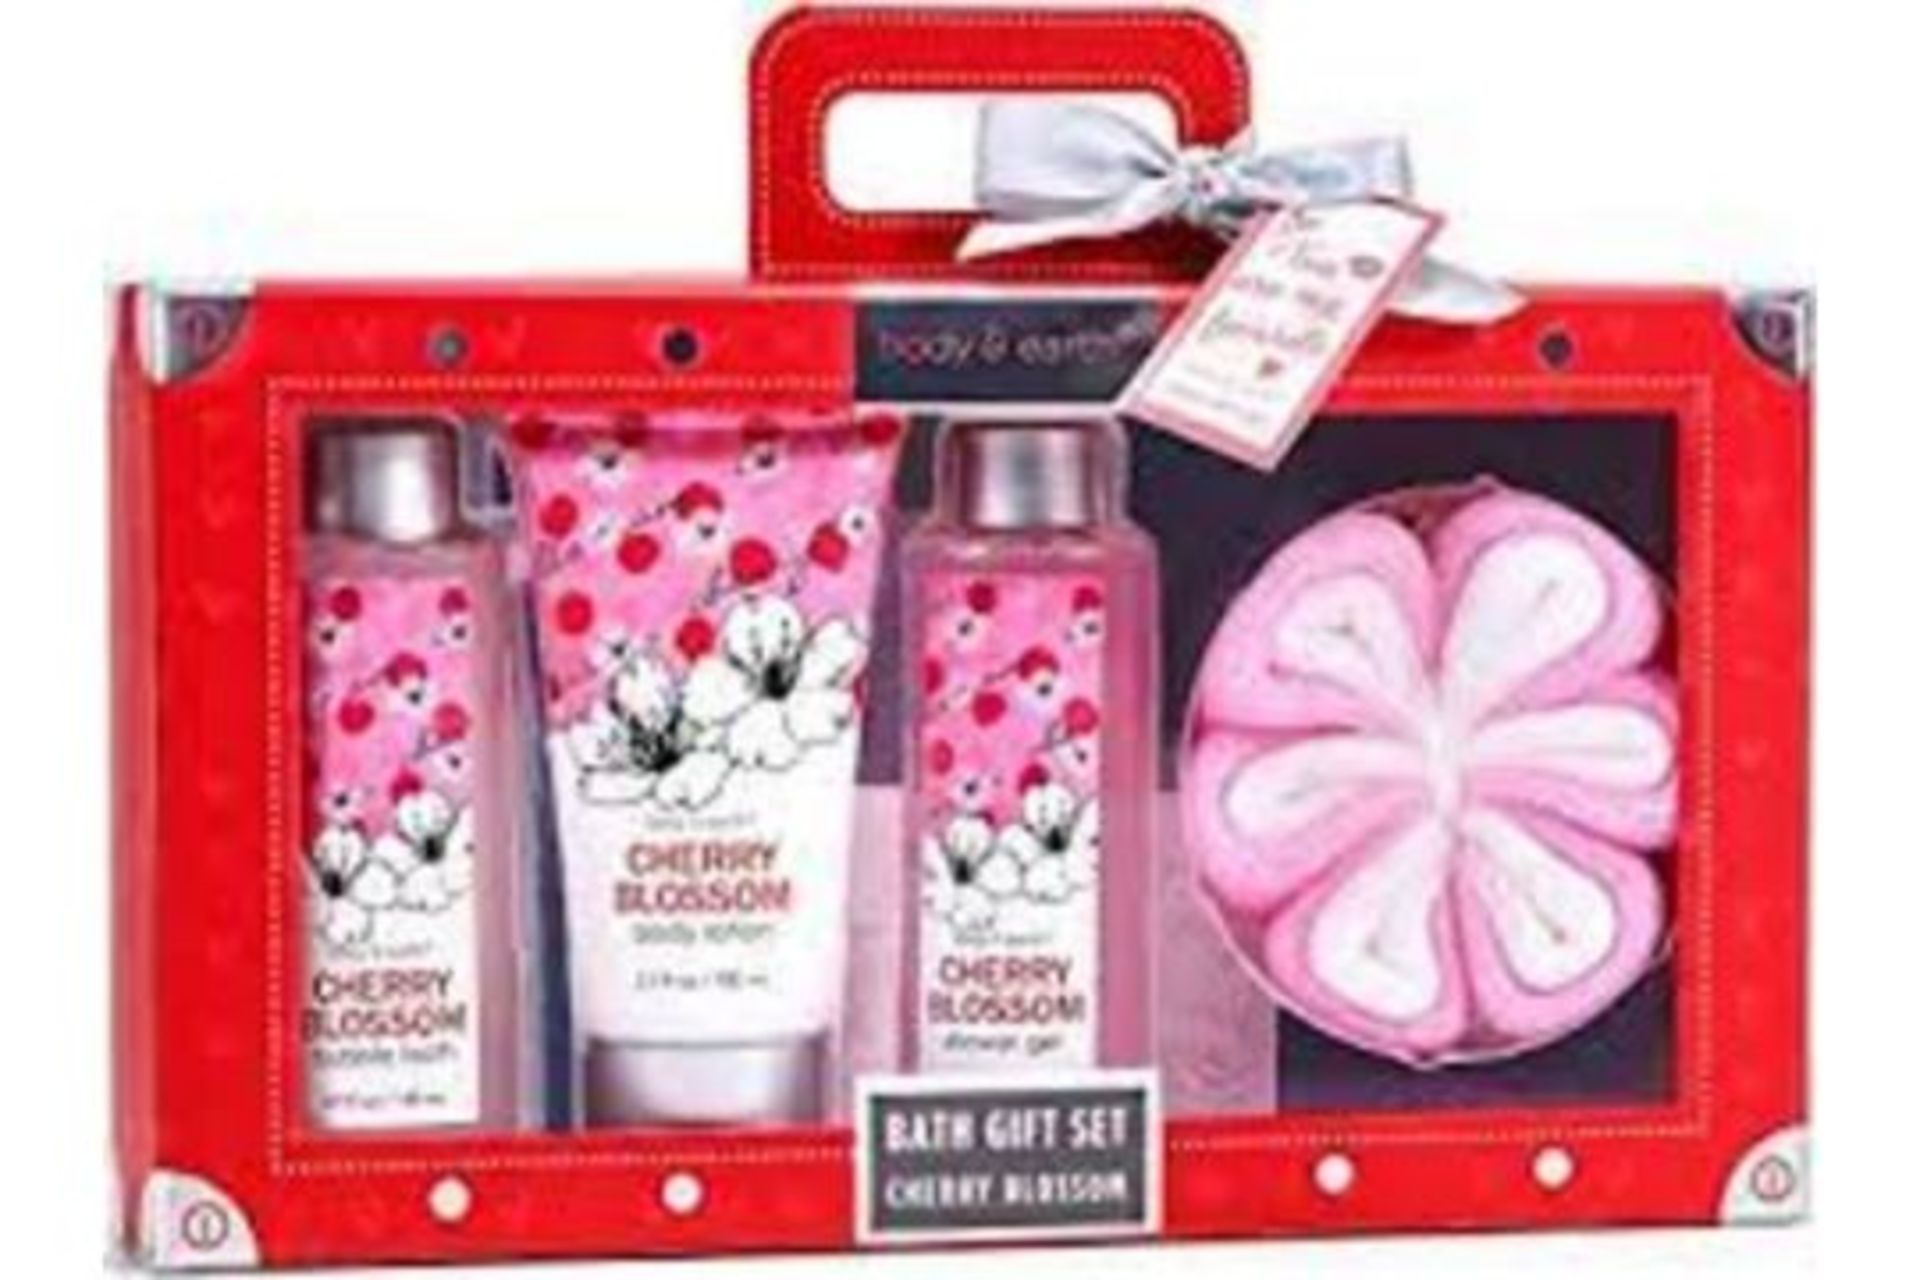 8 X NEW BOXED BODY & EARTH Cherry Blossom 4 Piece Gift Sets. RRP £19.99 each. (ROW8.4) ??Love-Themed